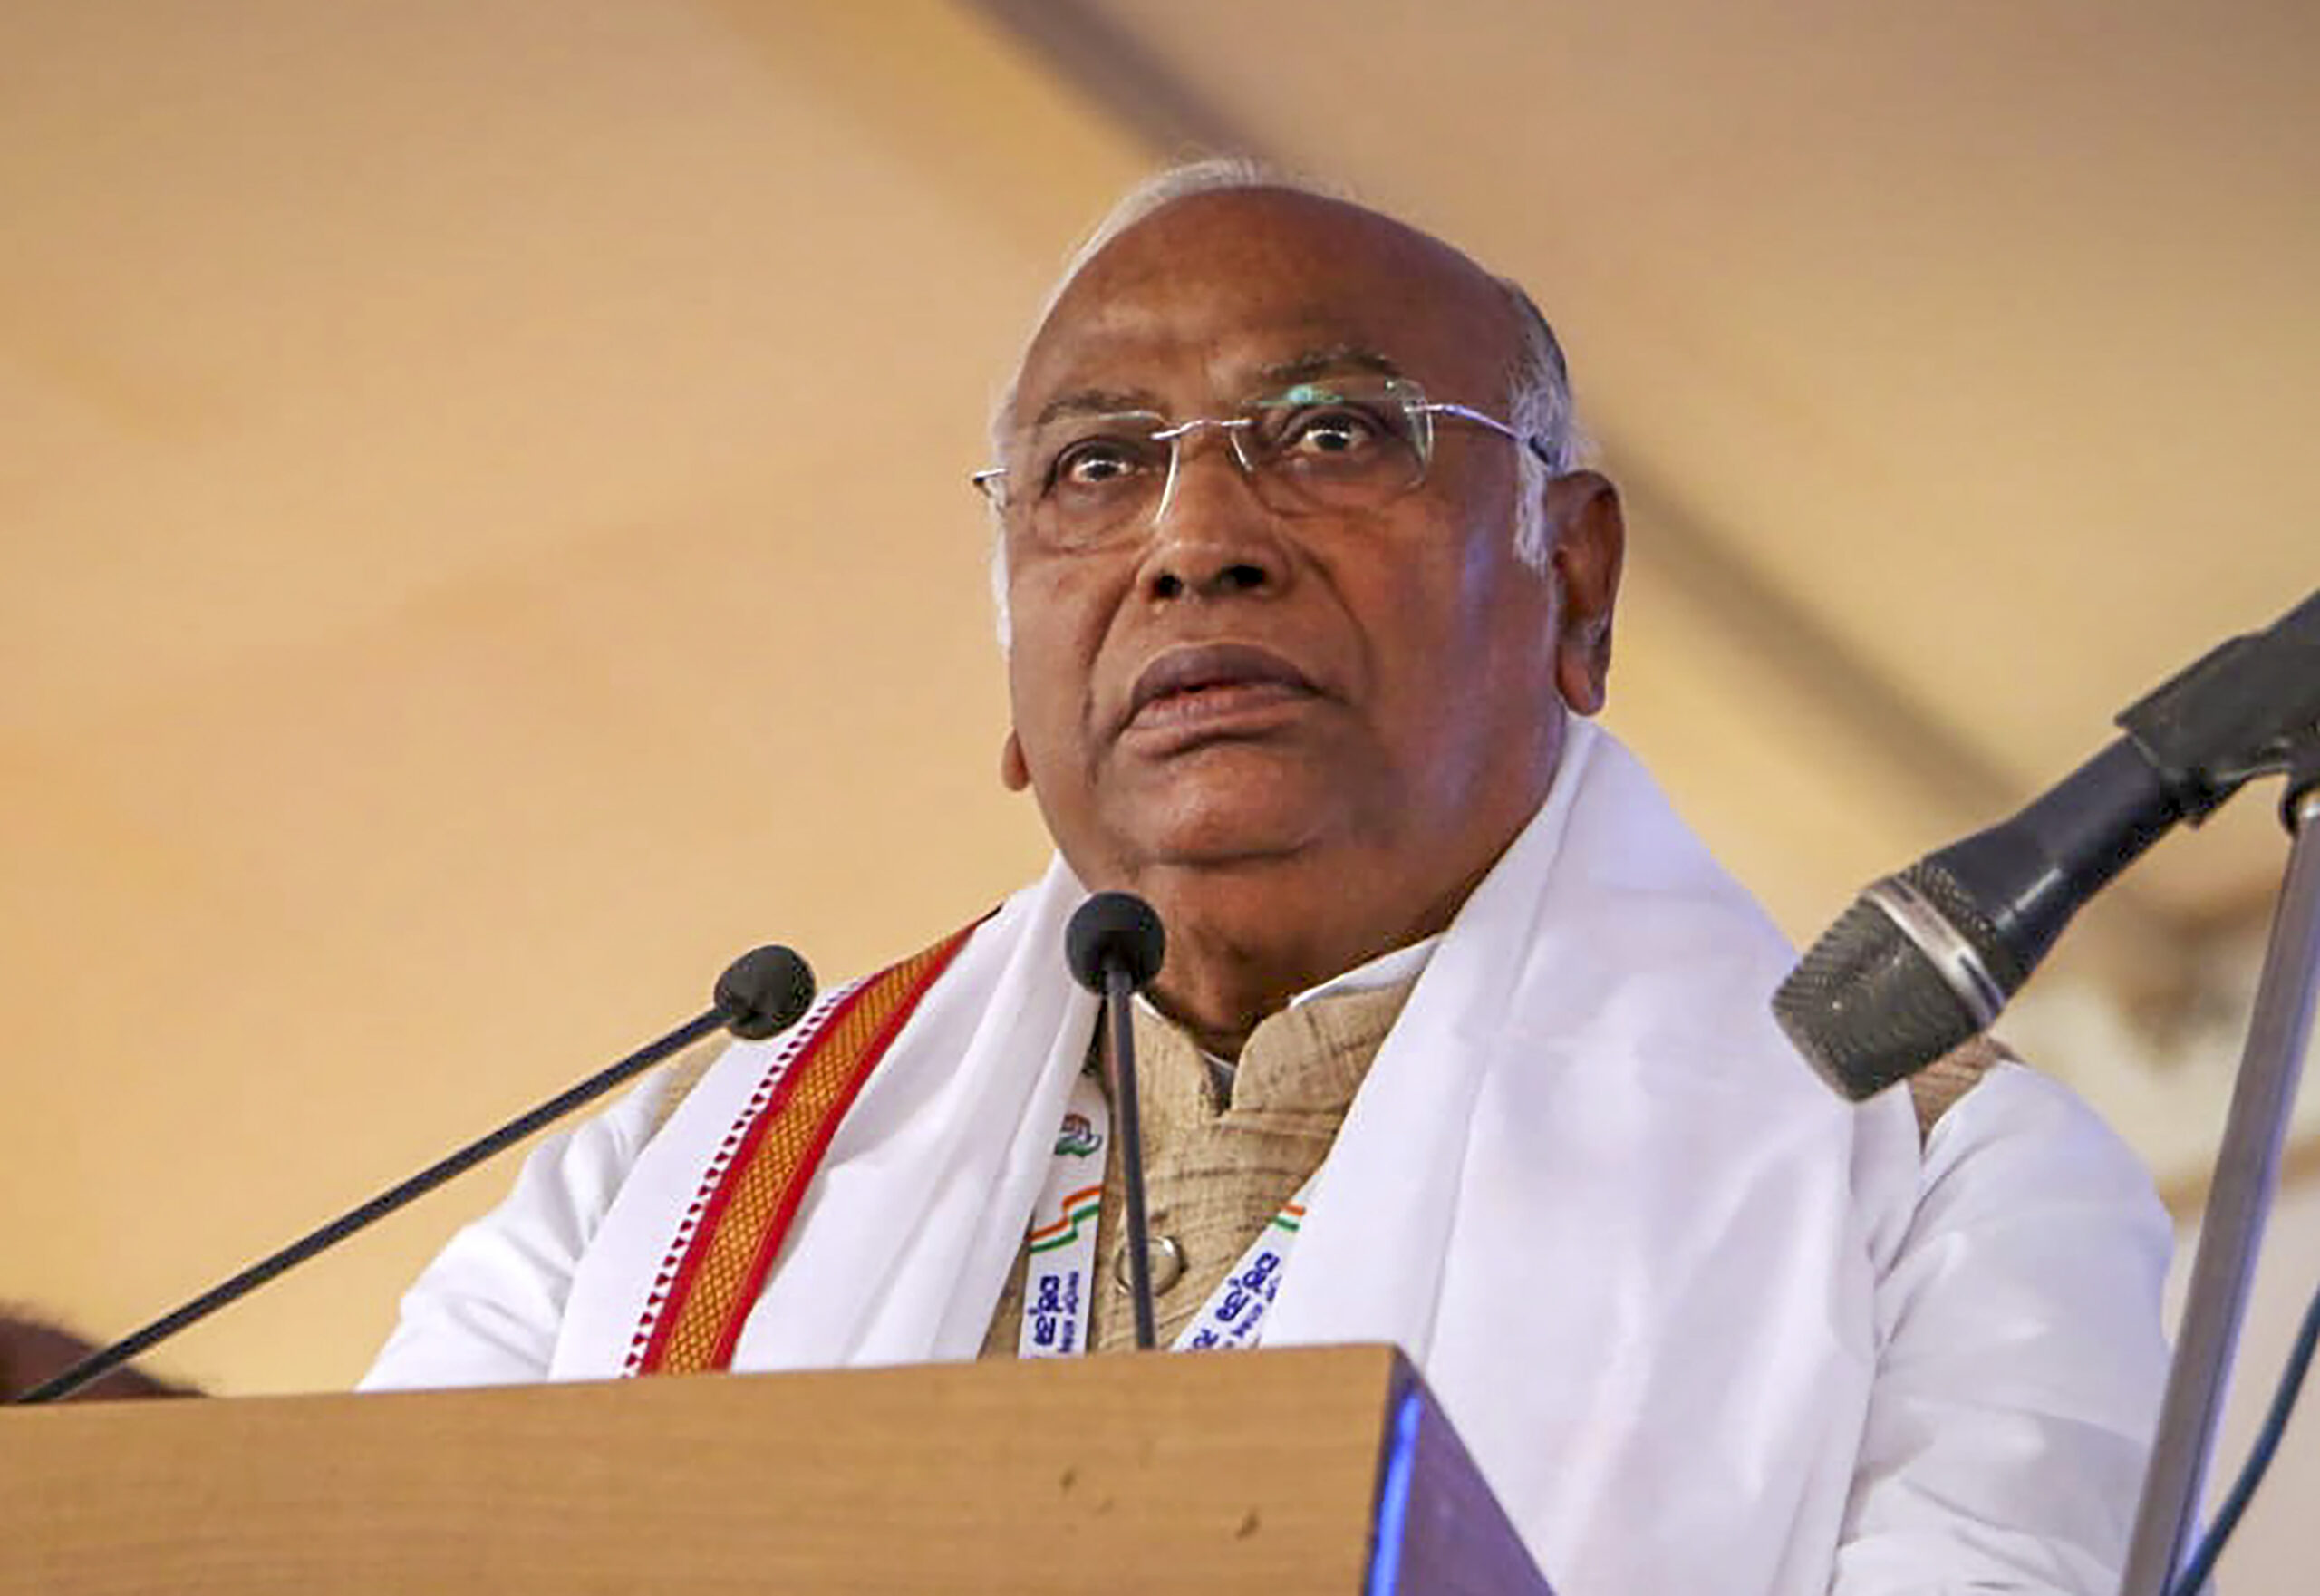 Cong chief Kharge accuses Modi govt of betraying people of Ladakh